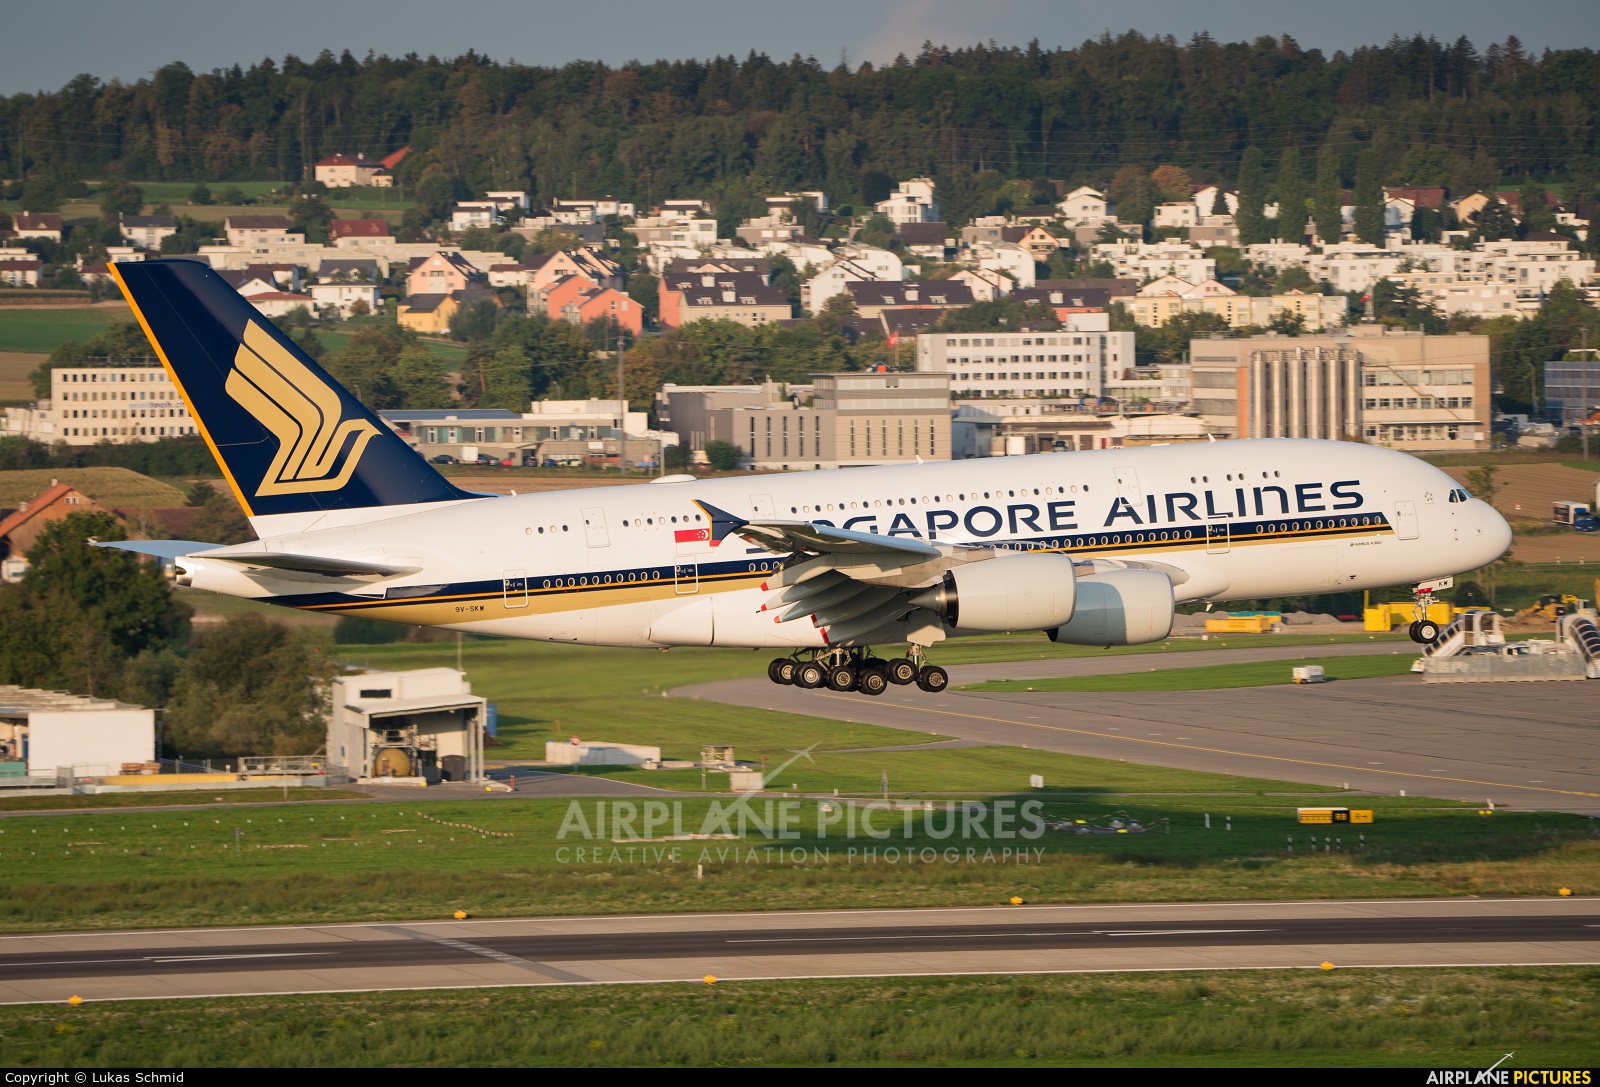 Singapore Airlines 9V-SKW aircraft at Zurich